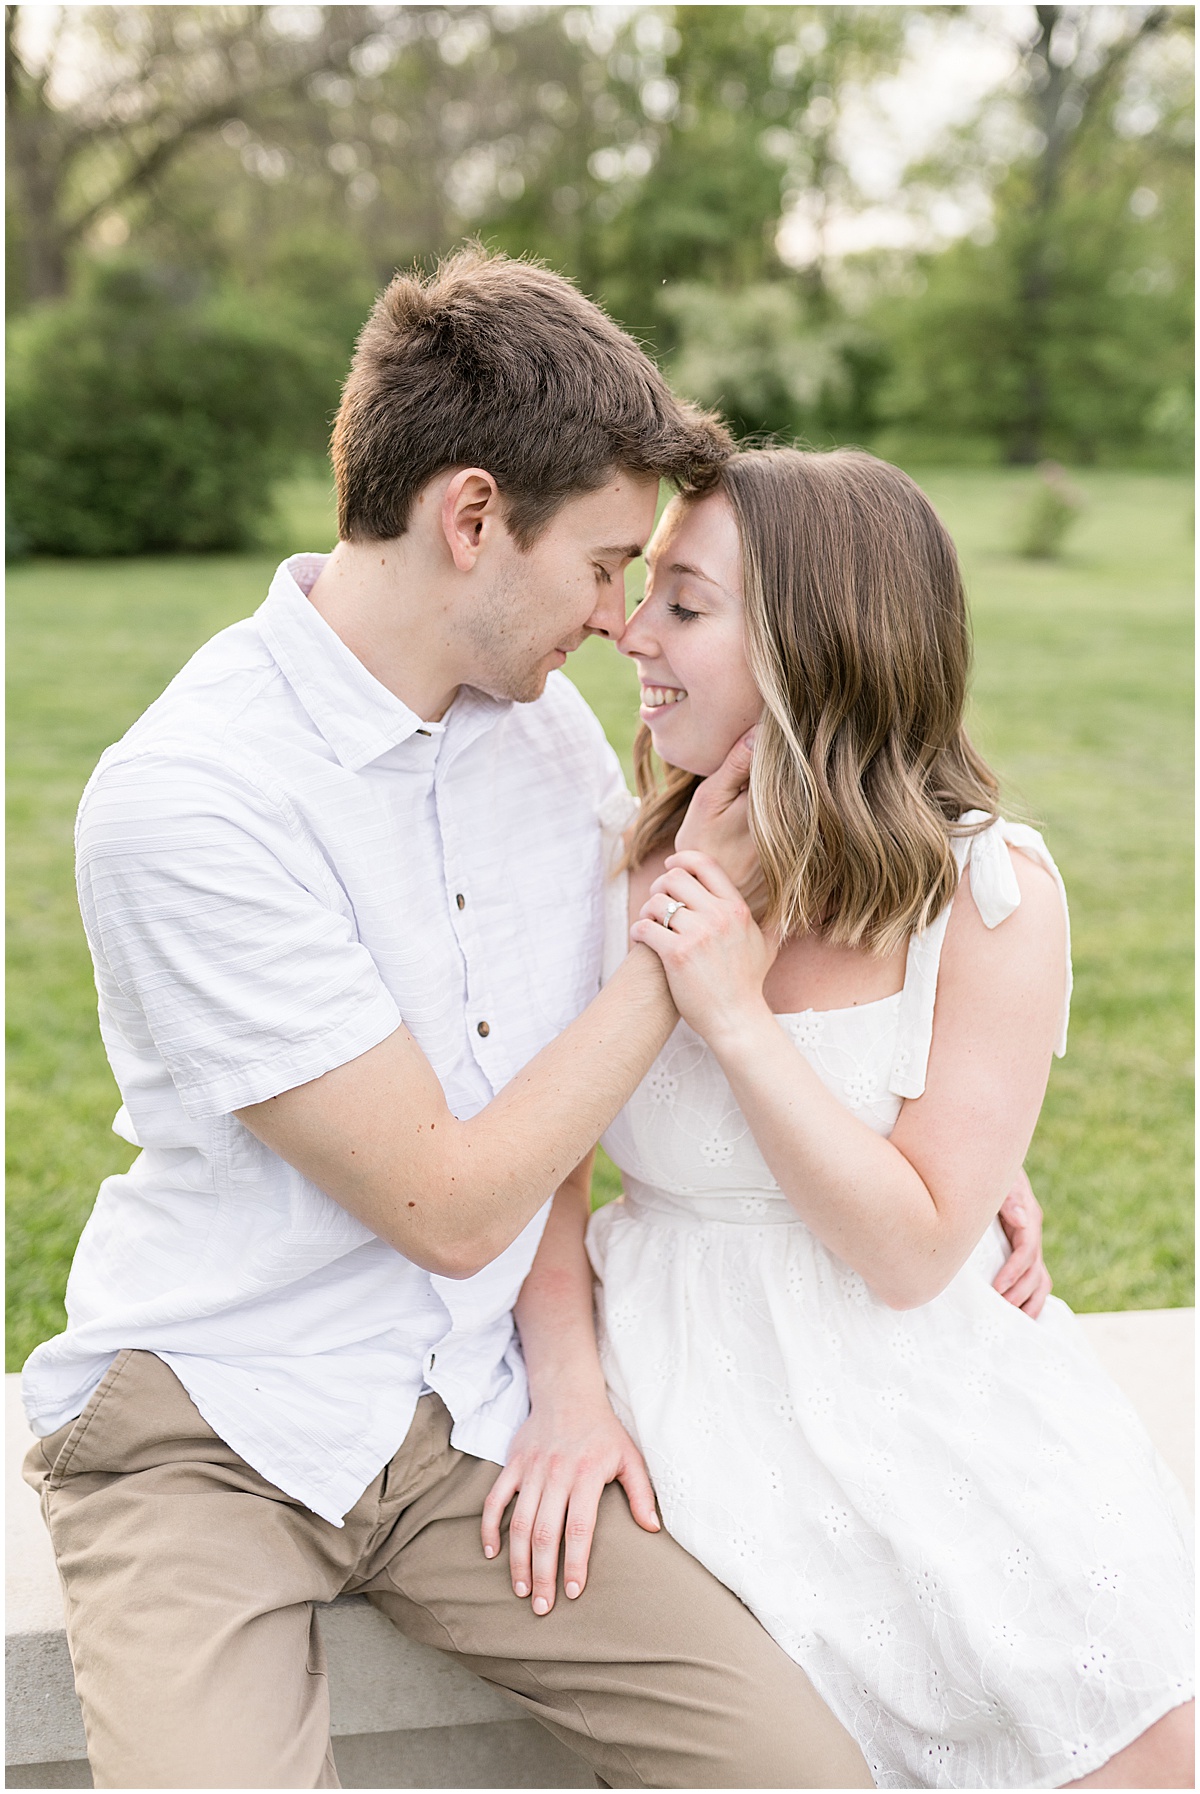 Couple touch noses during engagement photos at Holcomb Gardens in Indianapolis.